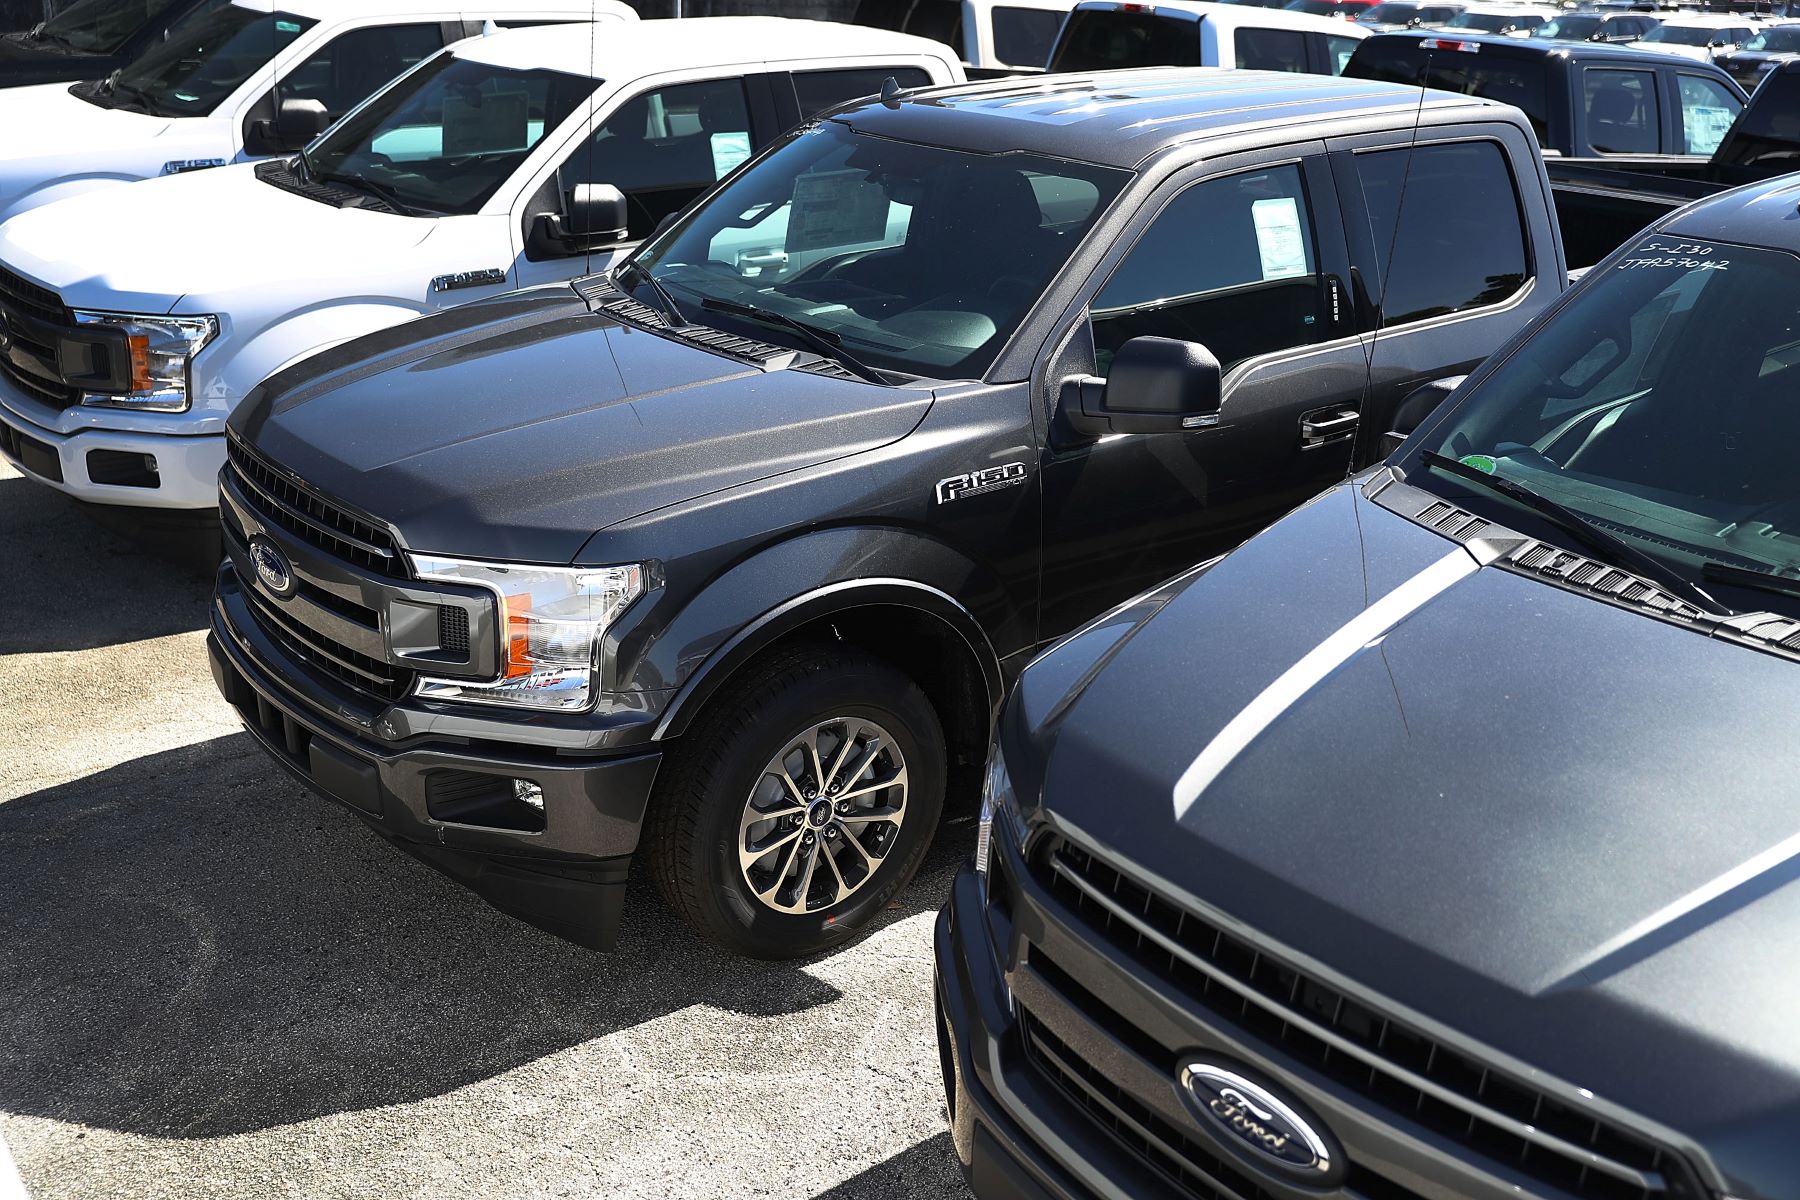 A lineup of Ford pickup truck models seen on the Metro Ford's car sales lot in Miami, Florida